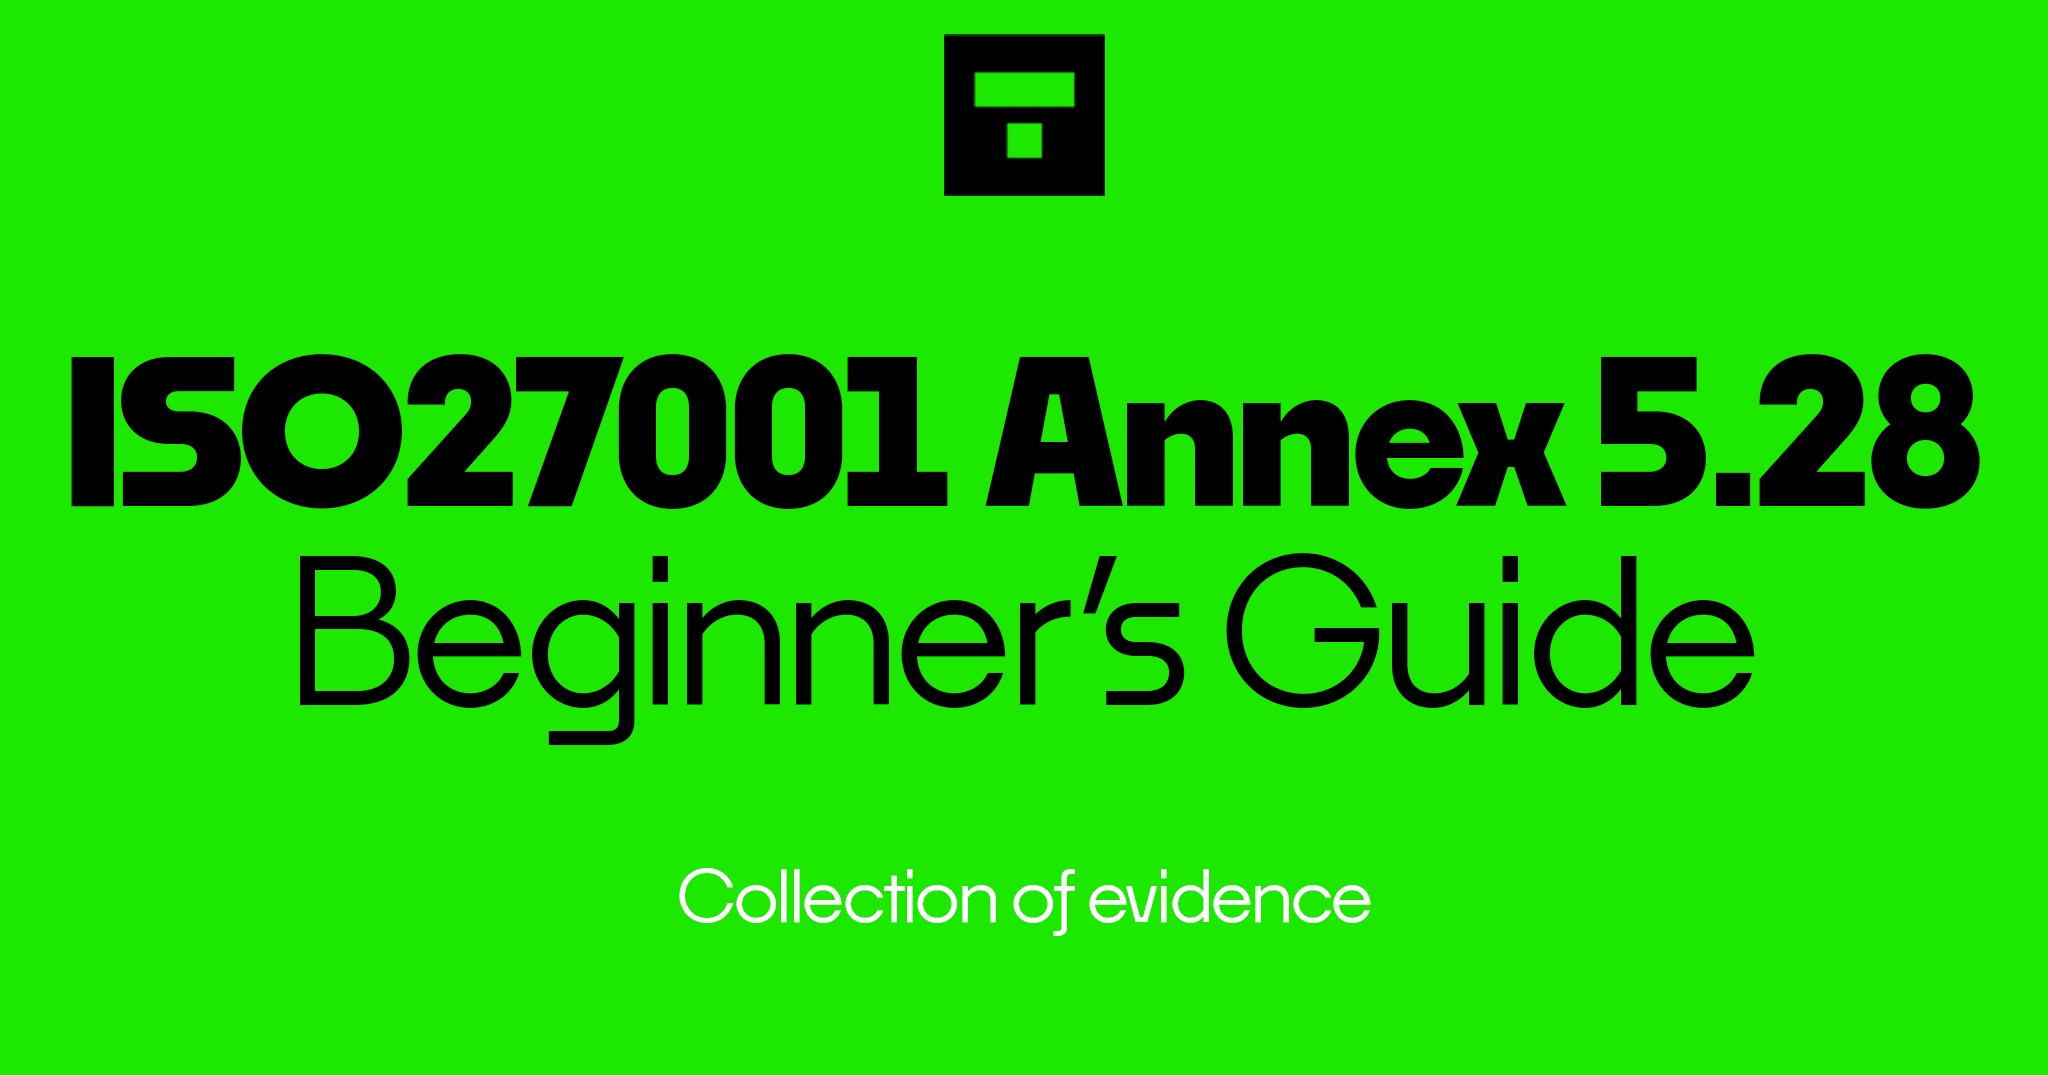 How To Implement ISO 27001 Annex A 5.28 Collection Of Evidence